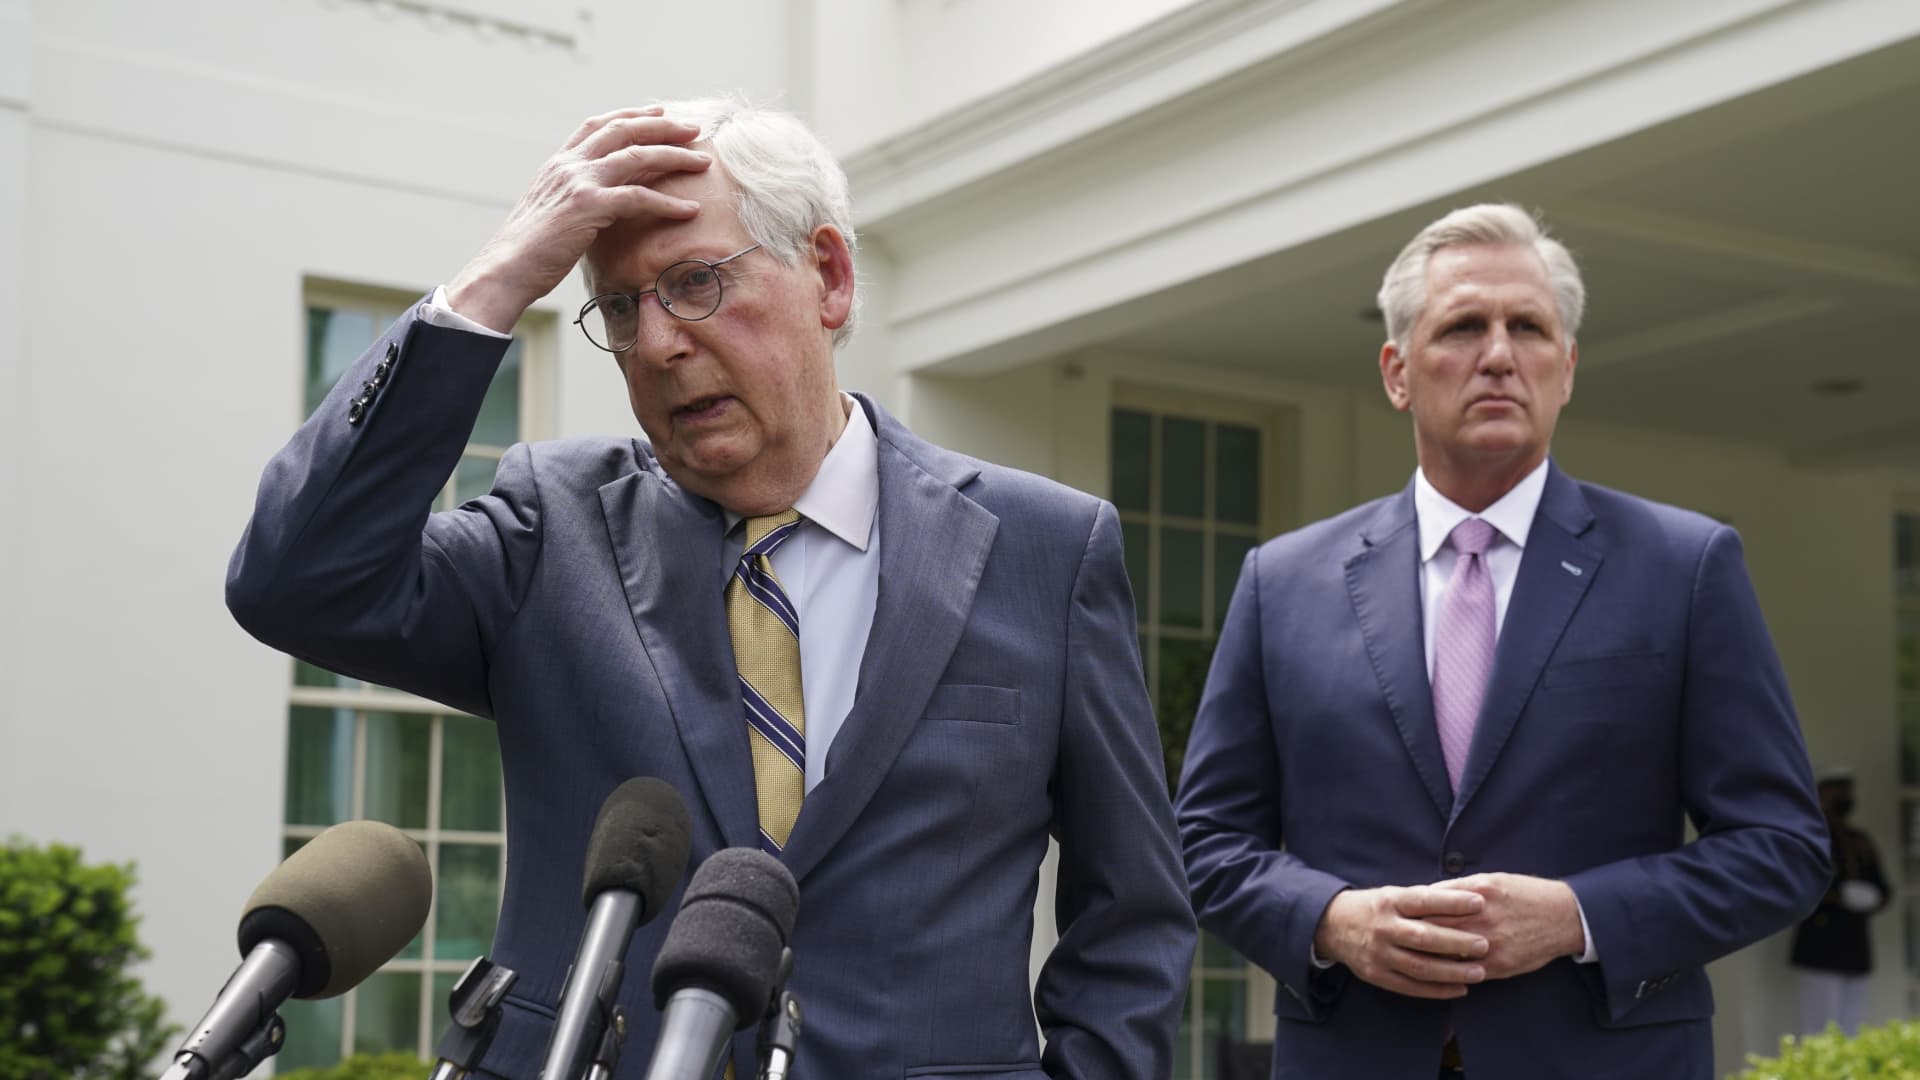 Senate Minority Leader Mitch McConnell puts his hand to his head as he and House Minority Leader Kevin McCarthy speak to reporters following an infrastructure meeting with U.S. President Joe Biden at the White House in Washington, U.S., May 12, 2021.